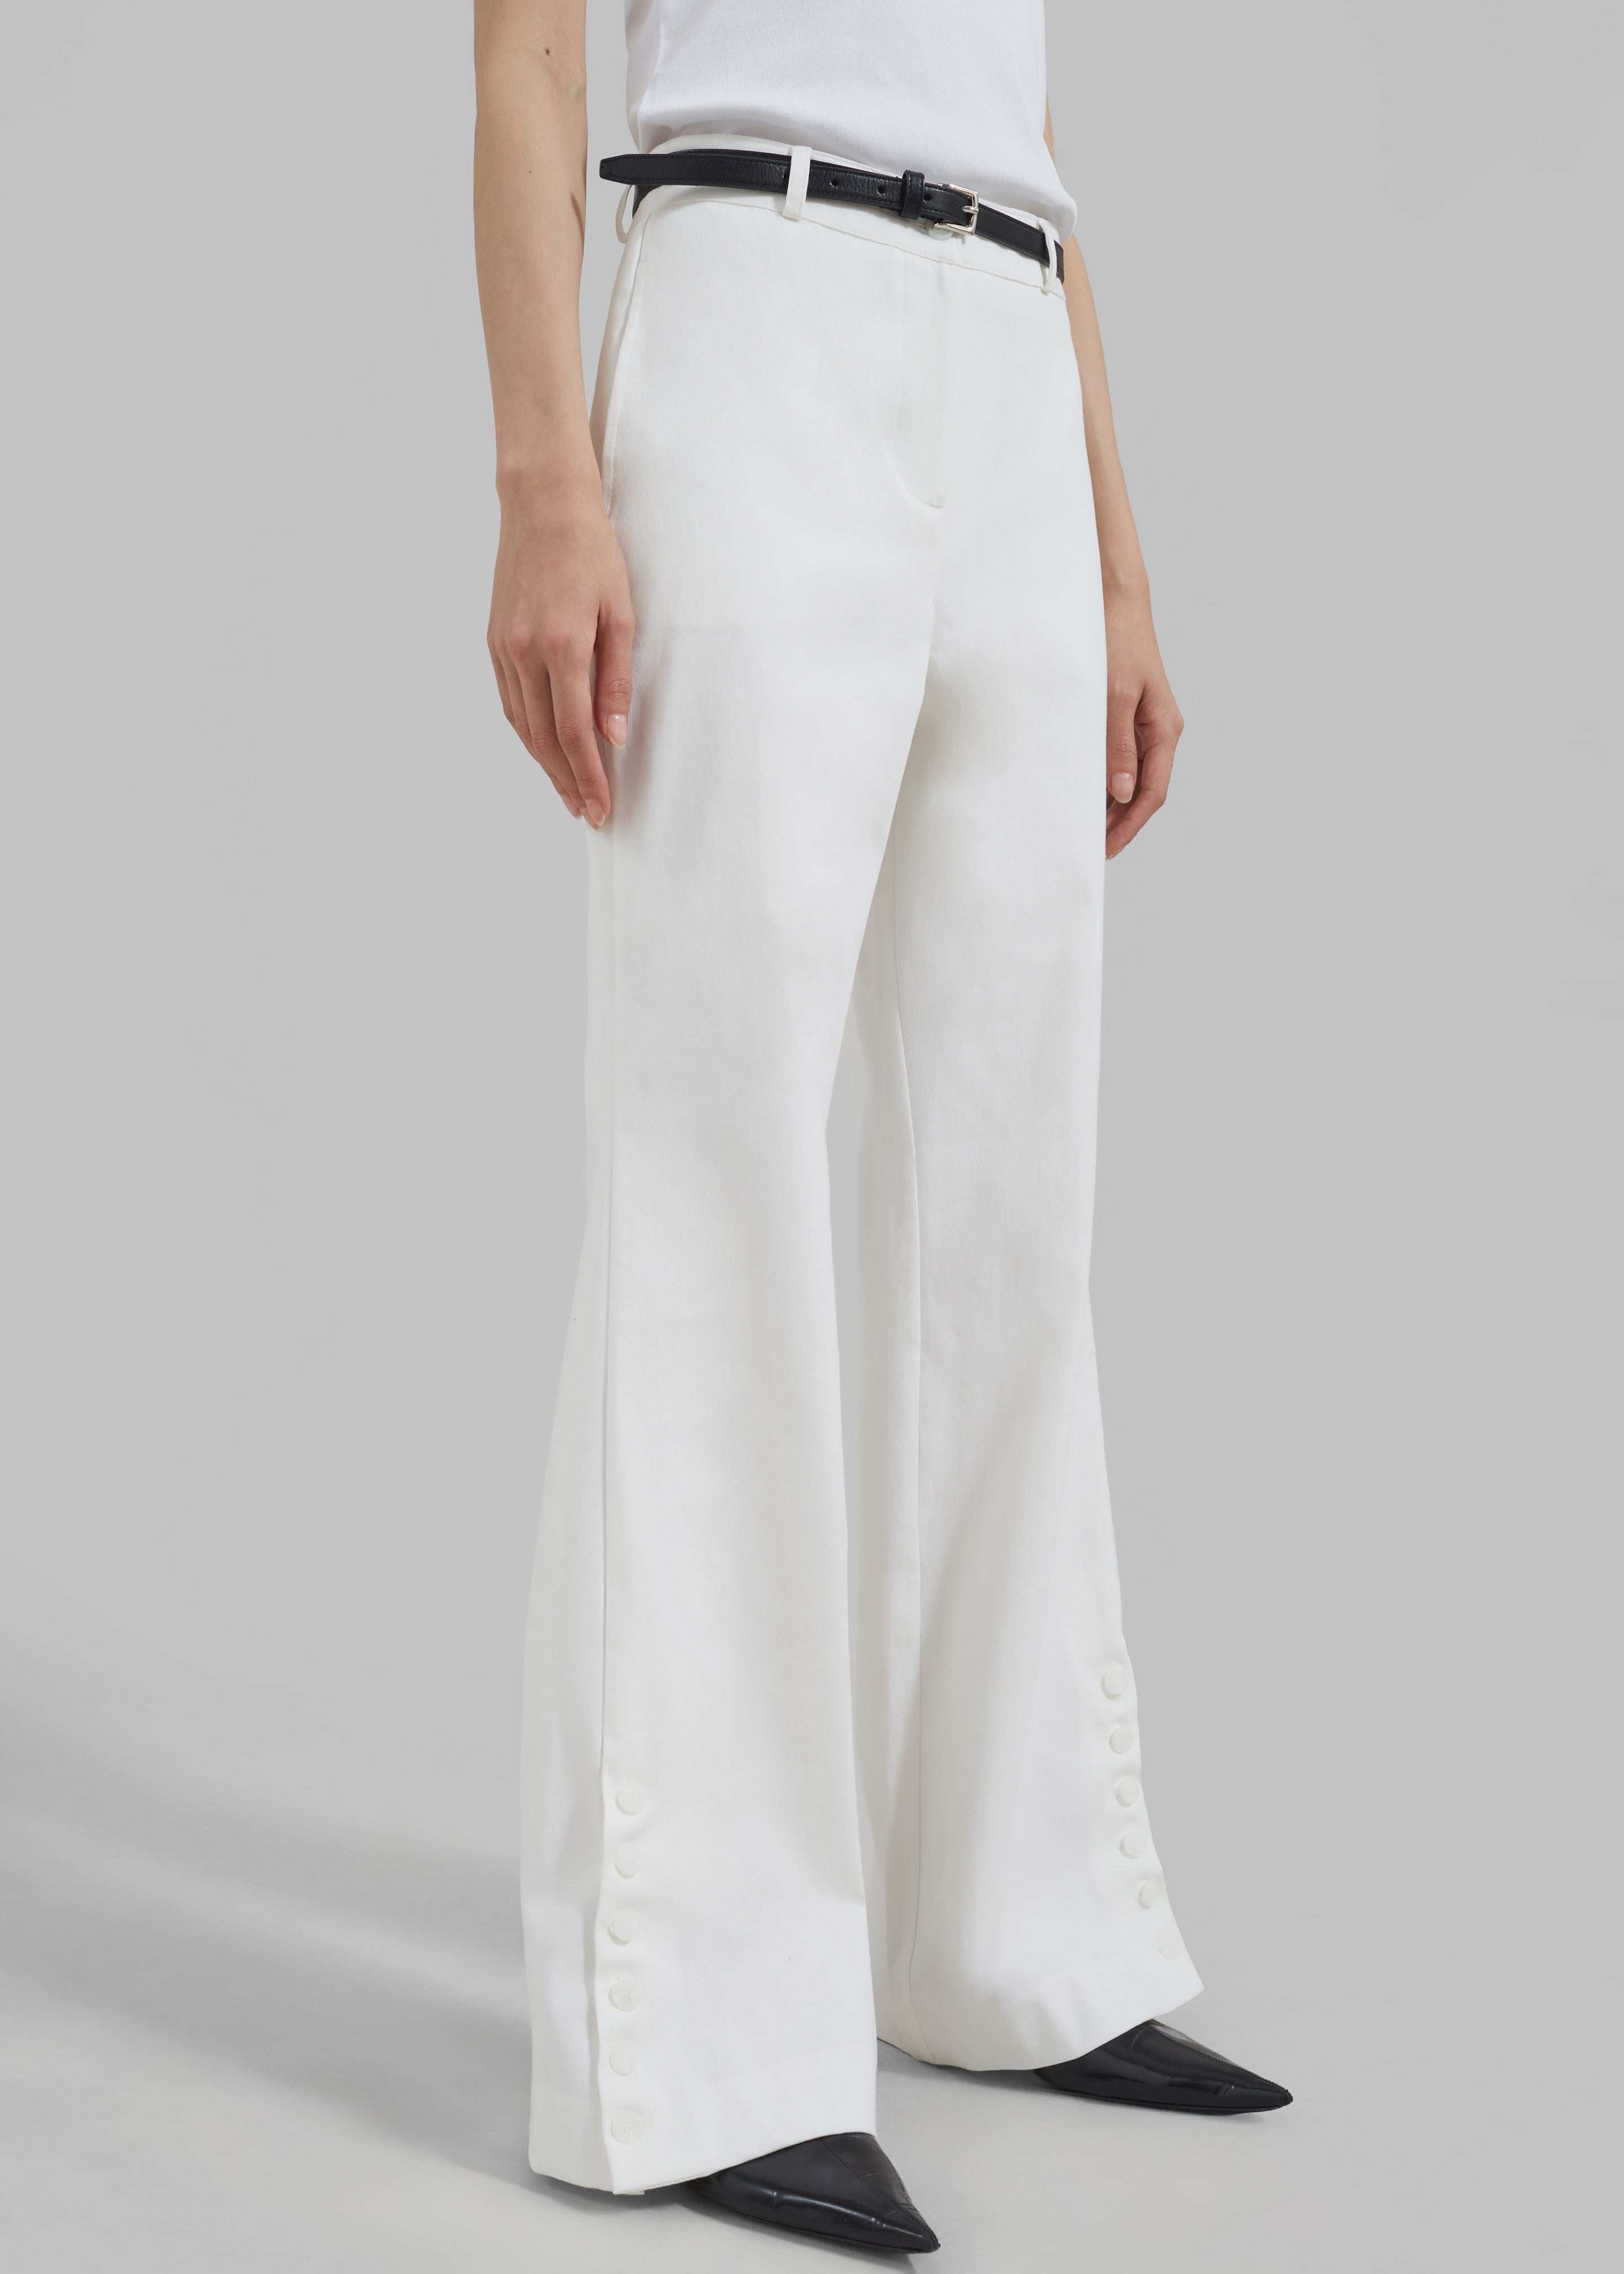 Michelle Flare Pants - Ivory - 2